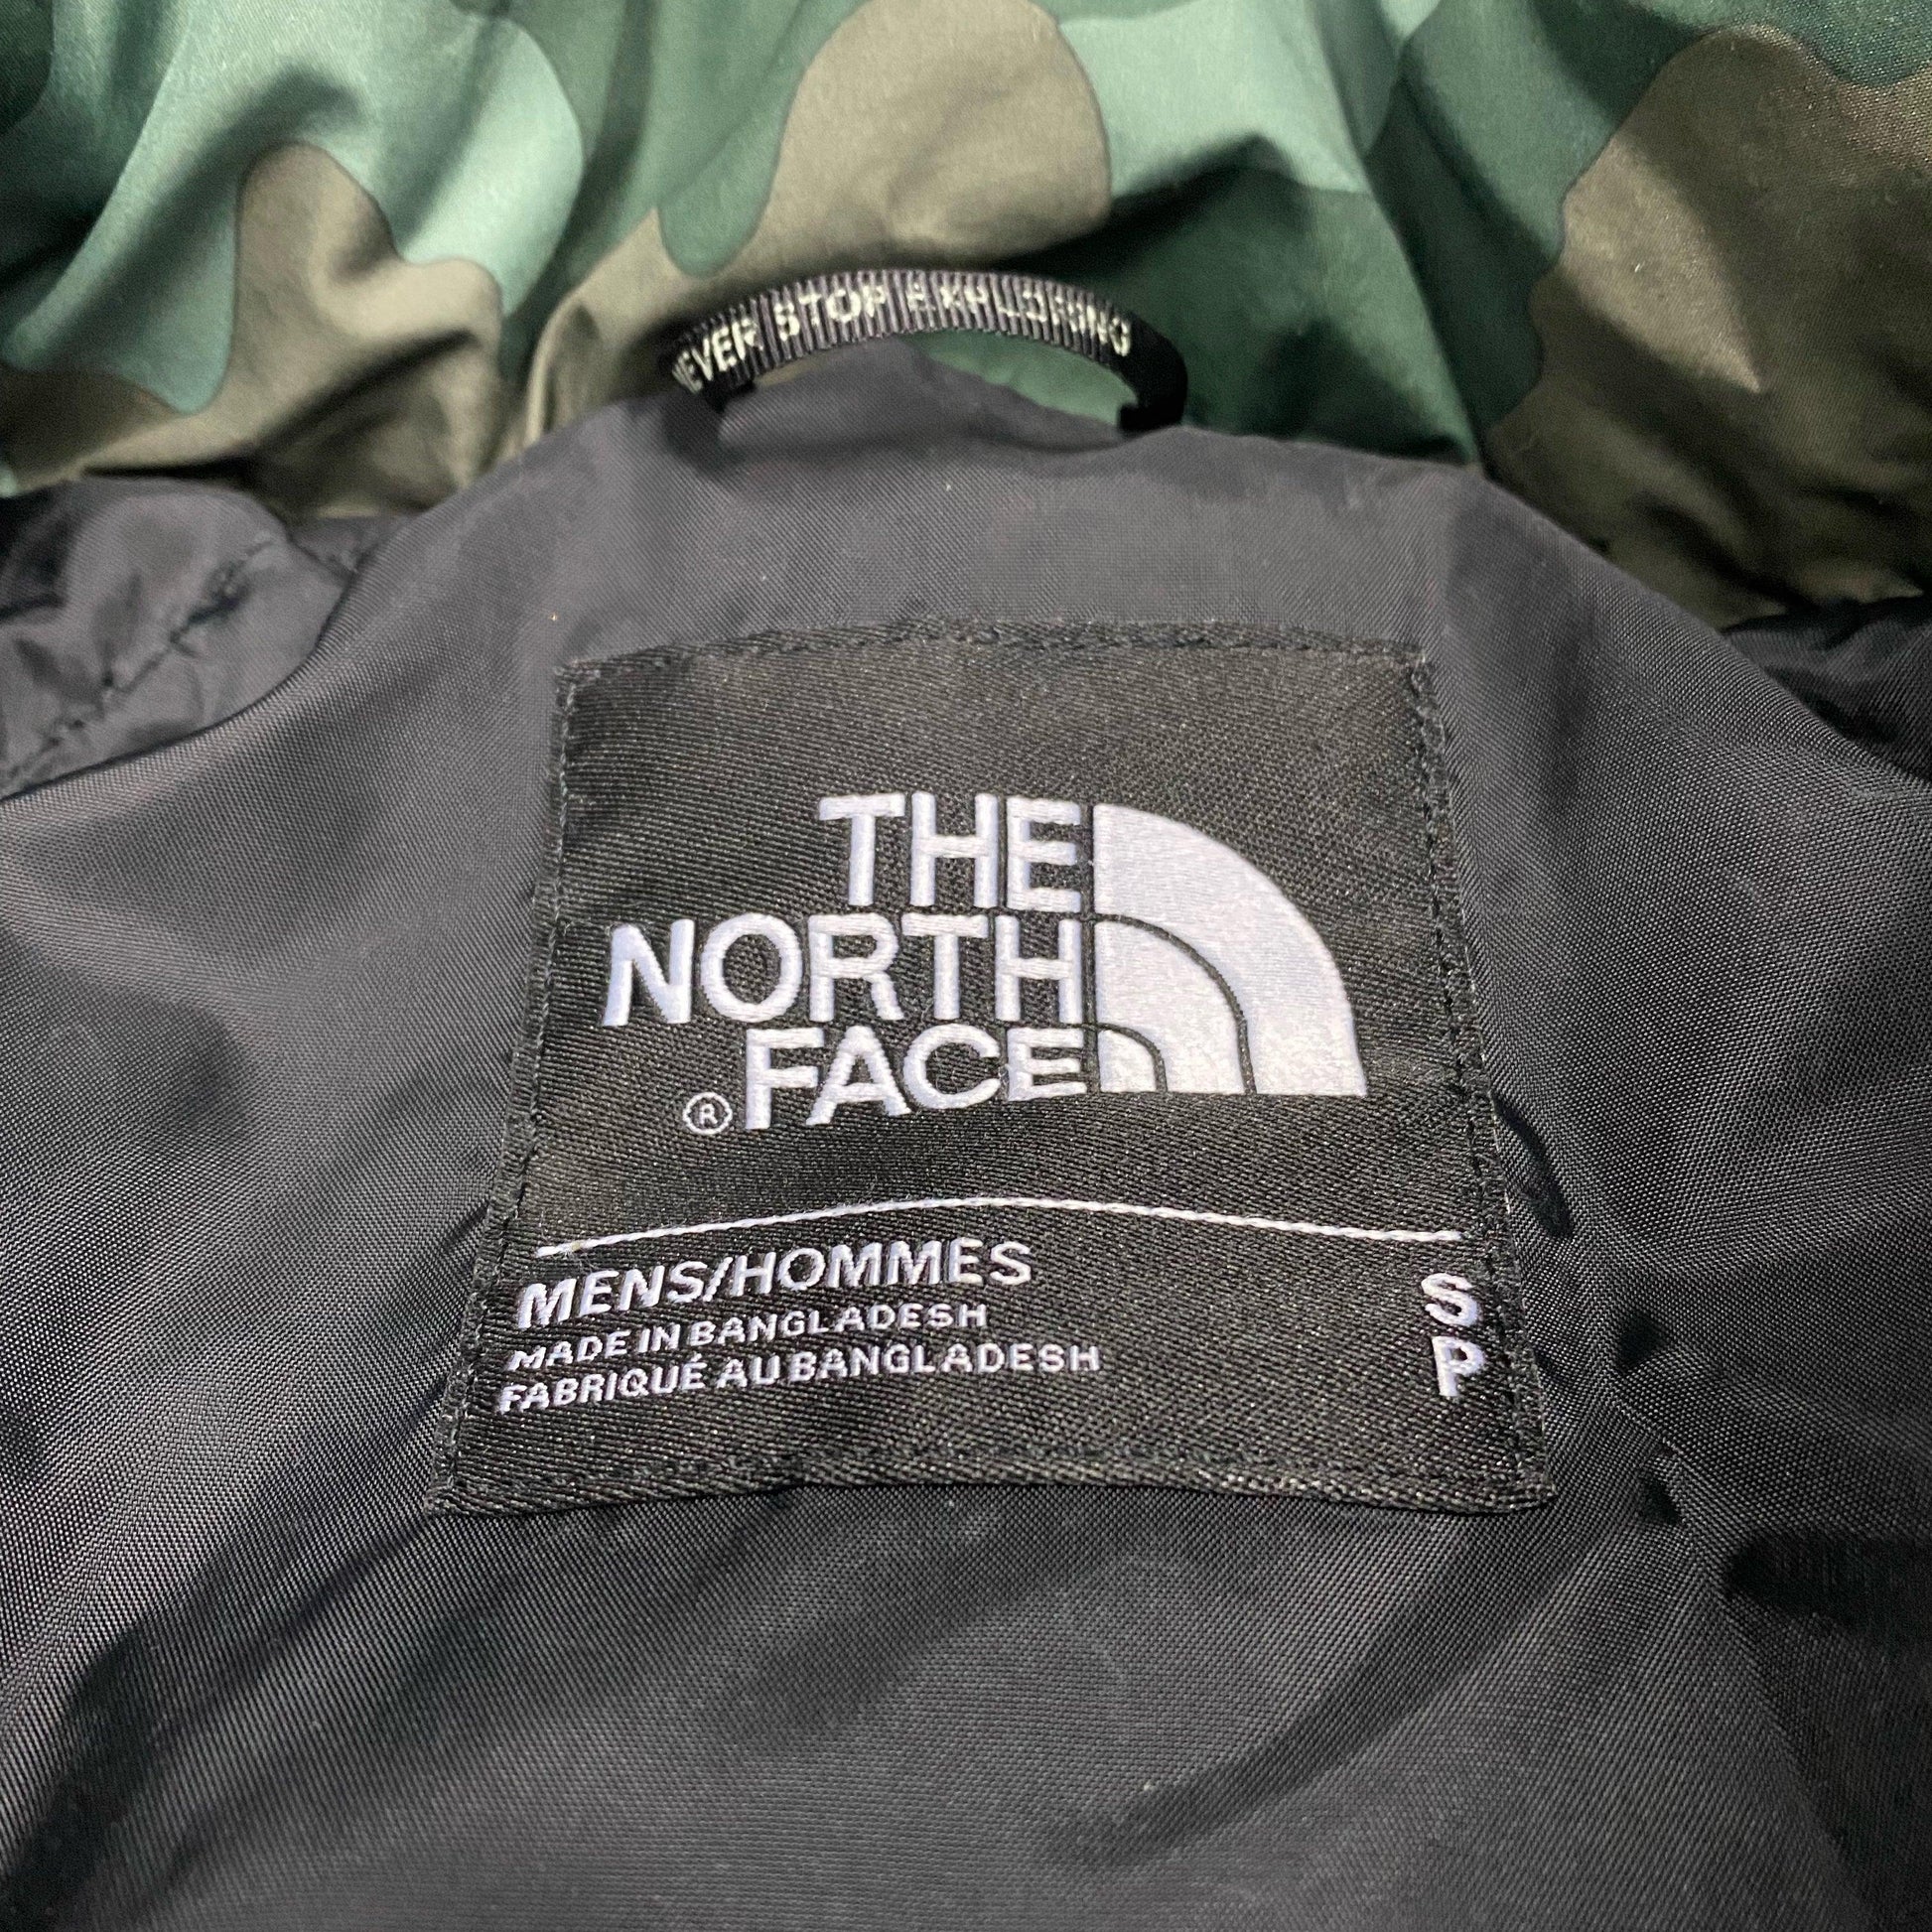 The North Face 700 Nuptse Puffer Jacket - Known Source